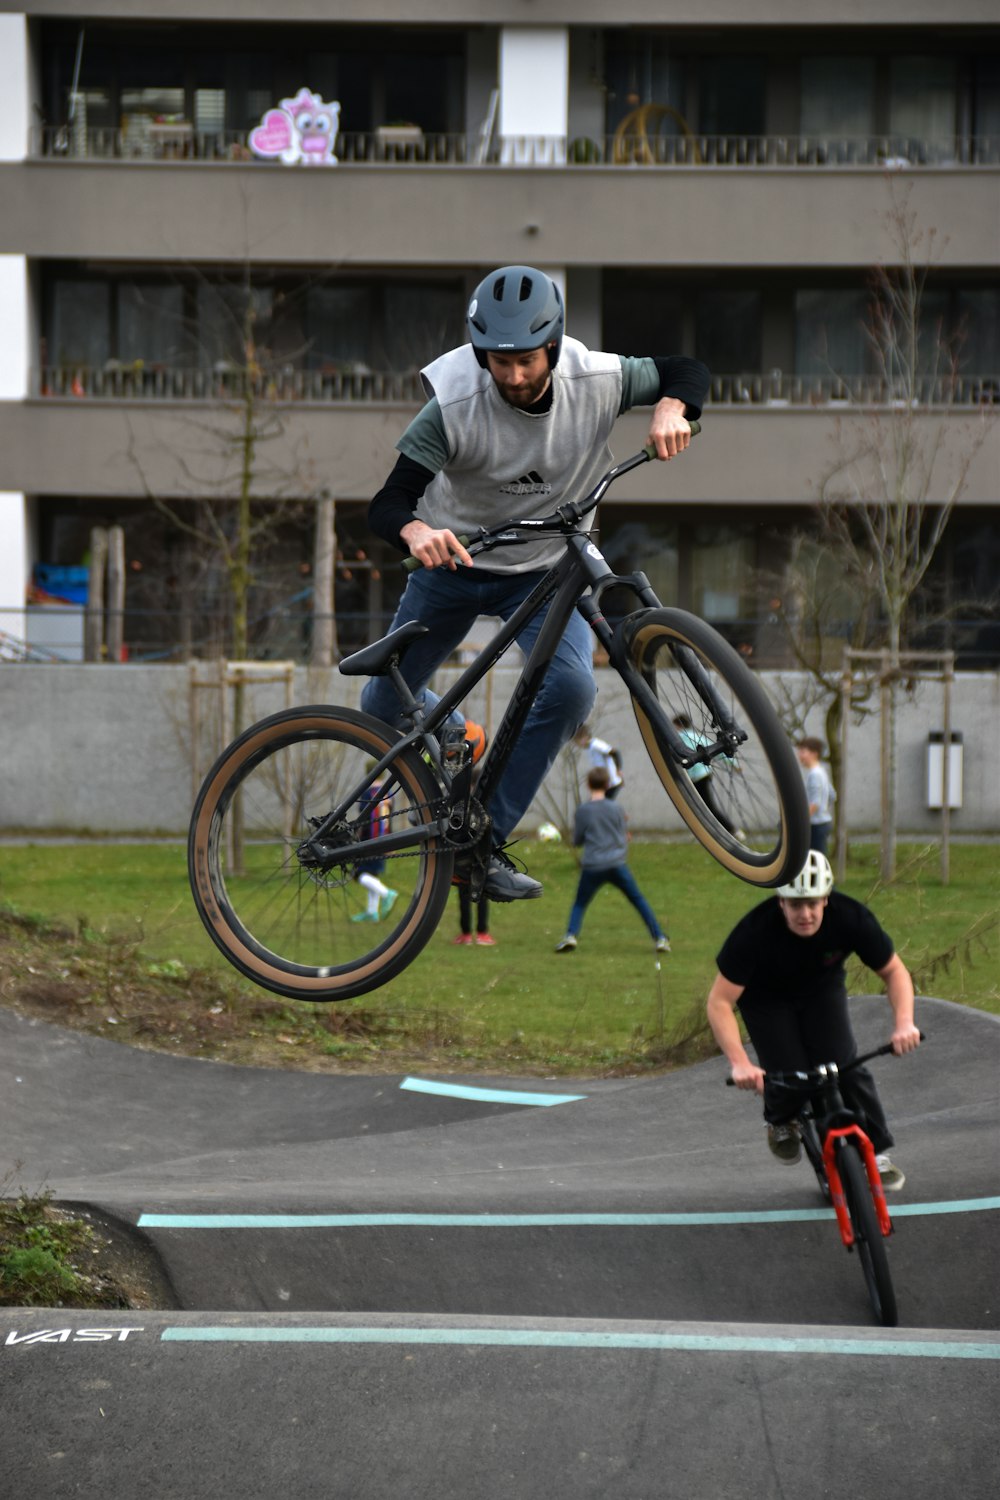 a man on a bike jumping over another man on a skateboard